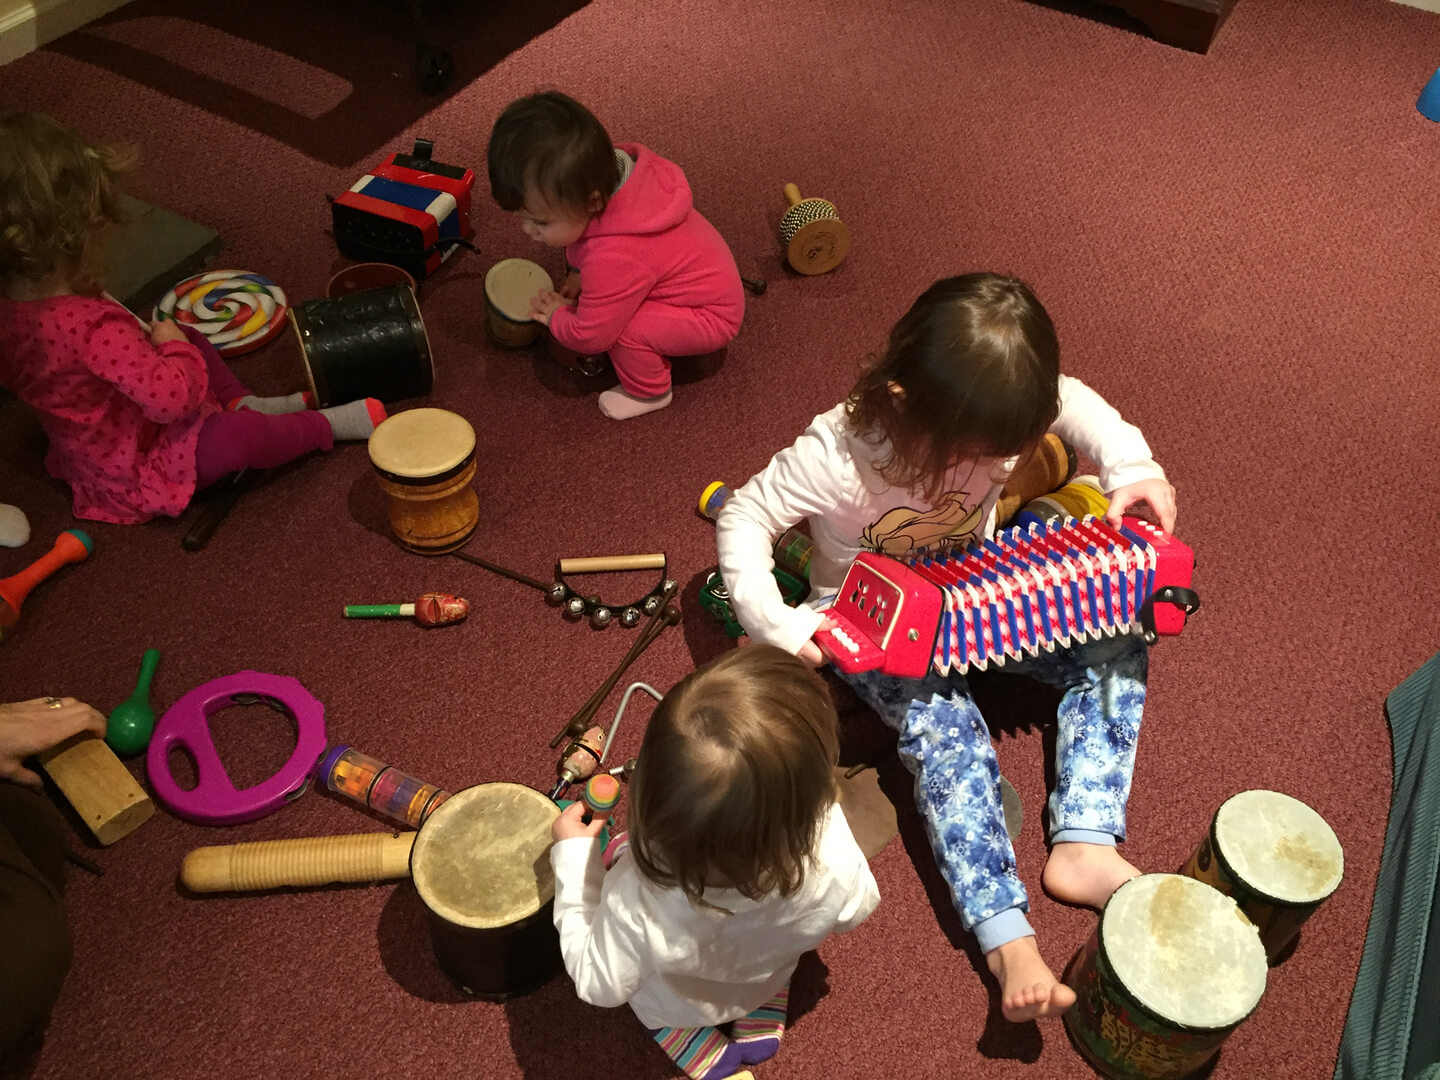 Children playing with musical instruments